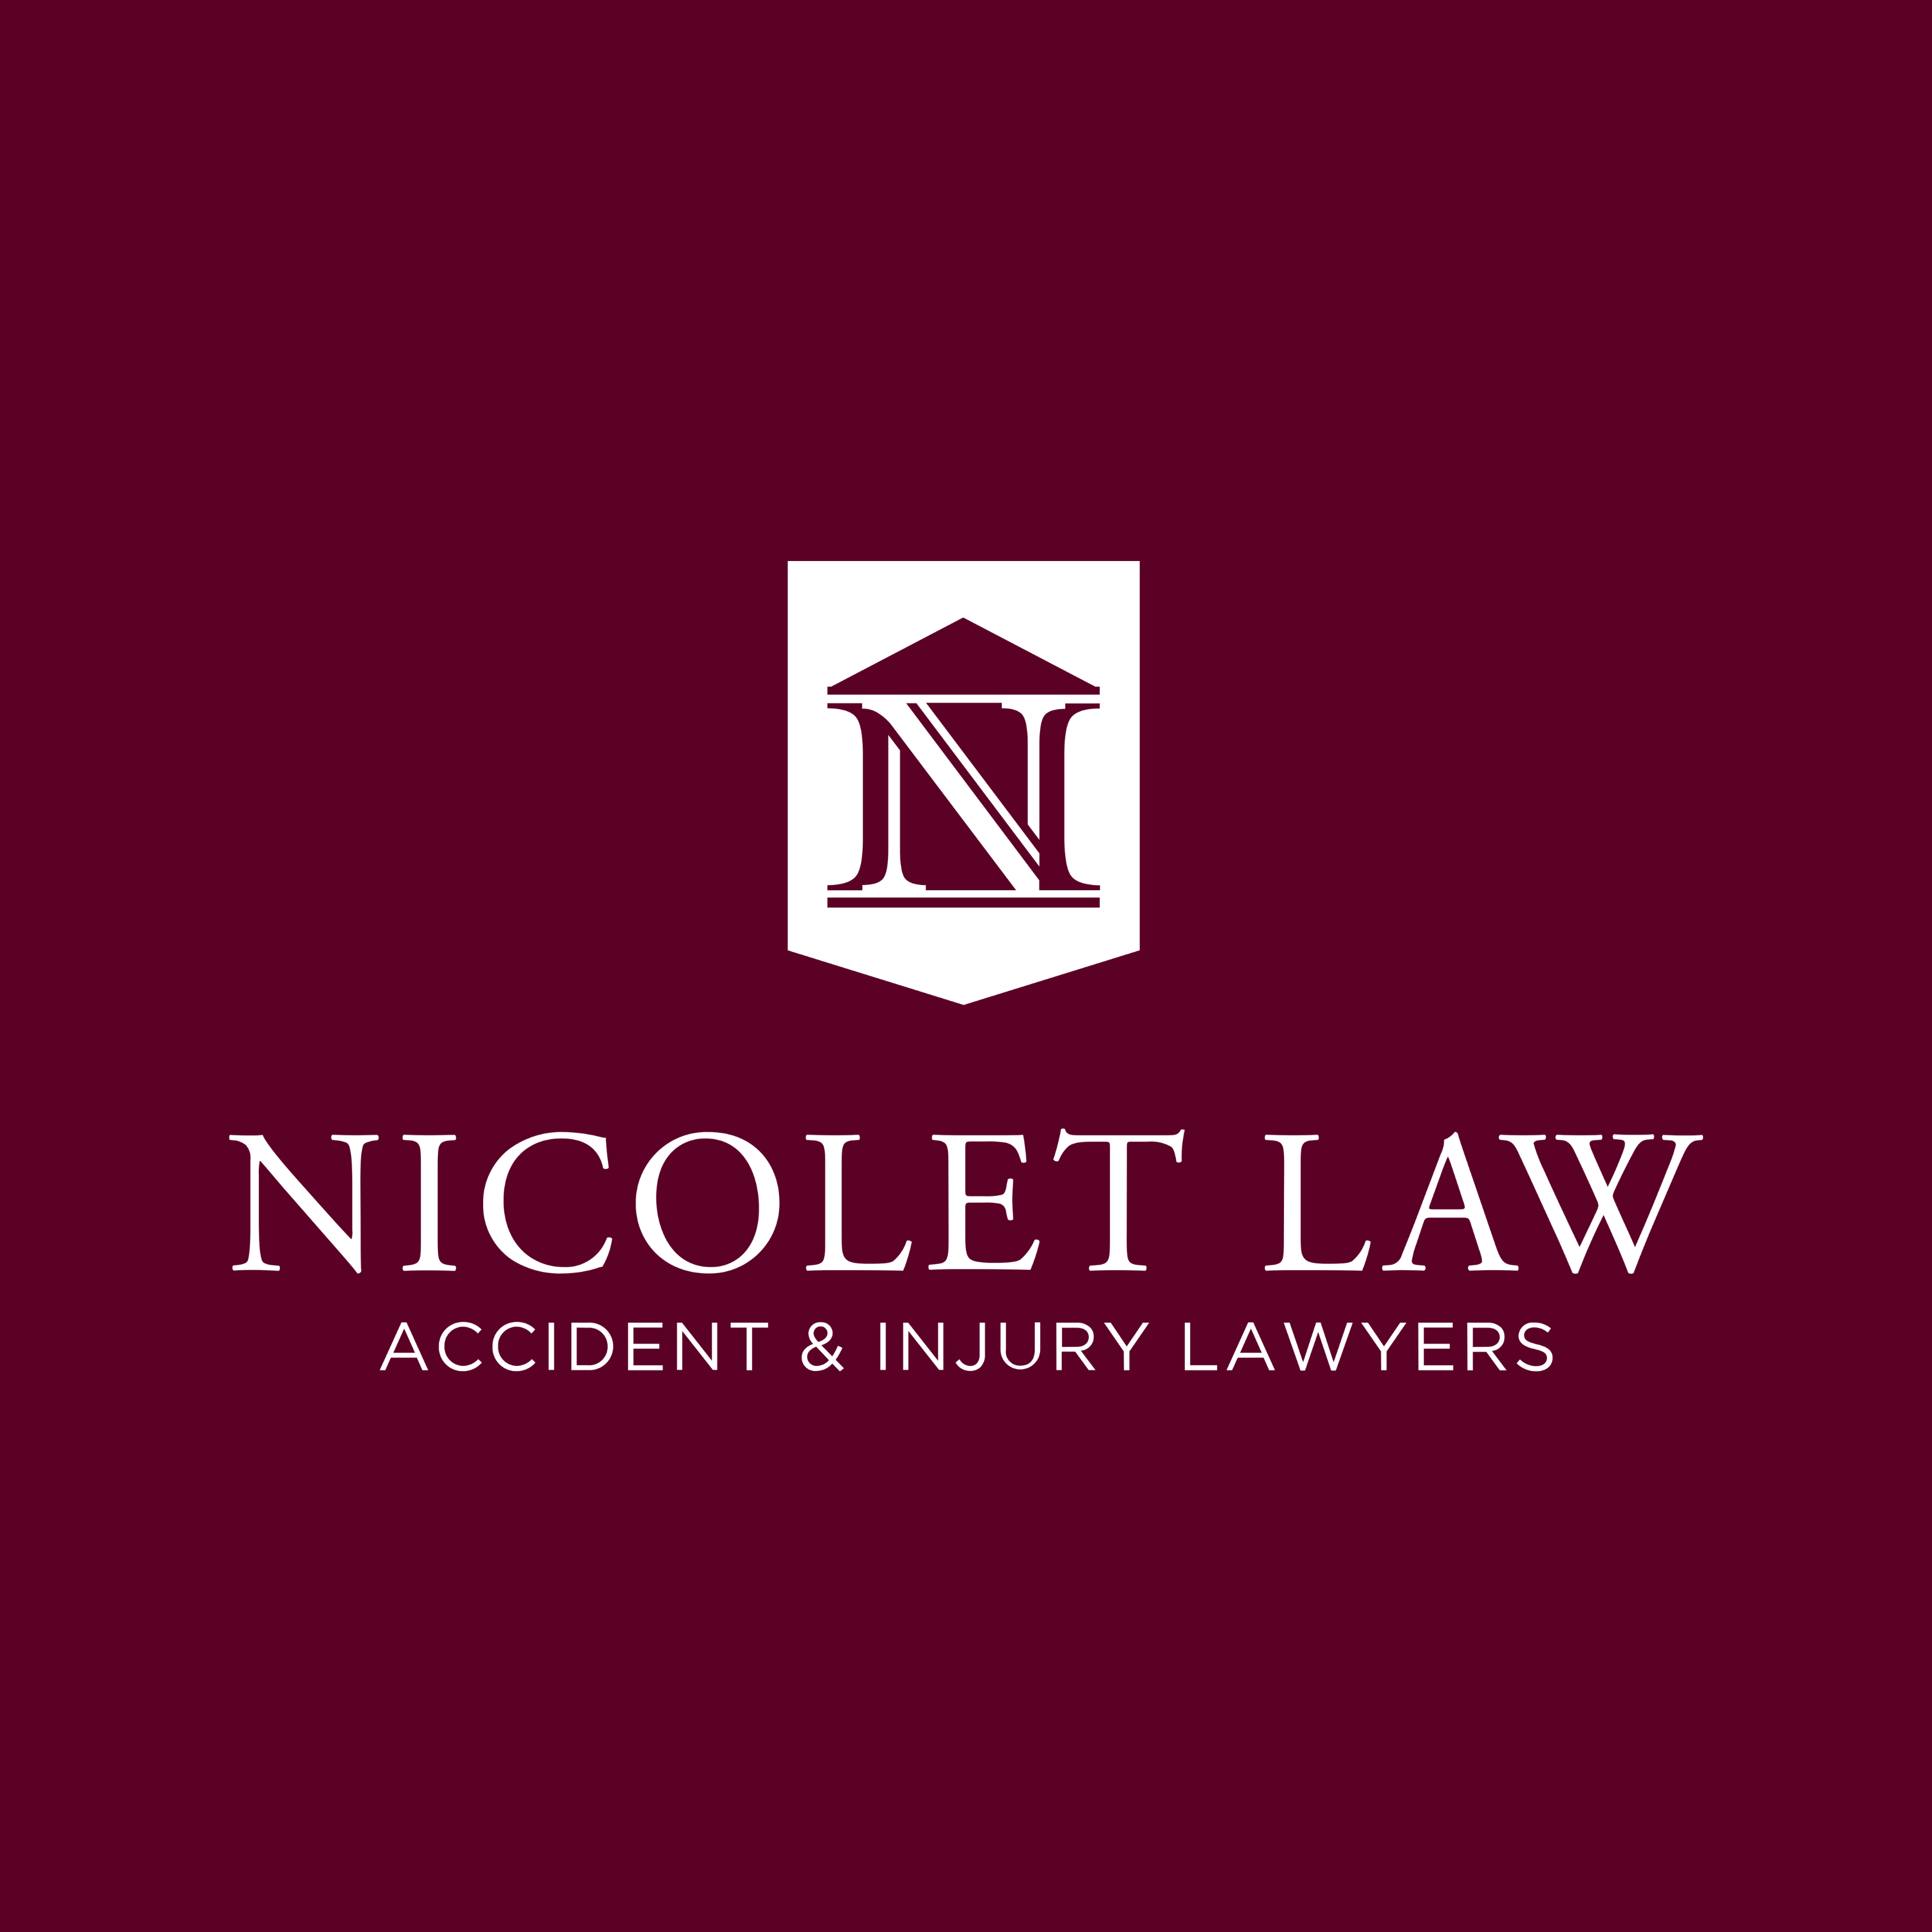 Nicolet Law Accident & Injury Lawyers - Fargo, ND 58102 - (701)970-2185 | ShowMeLocal.com